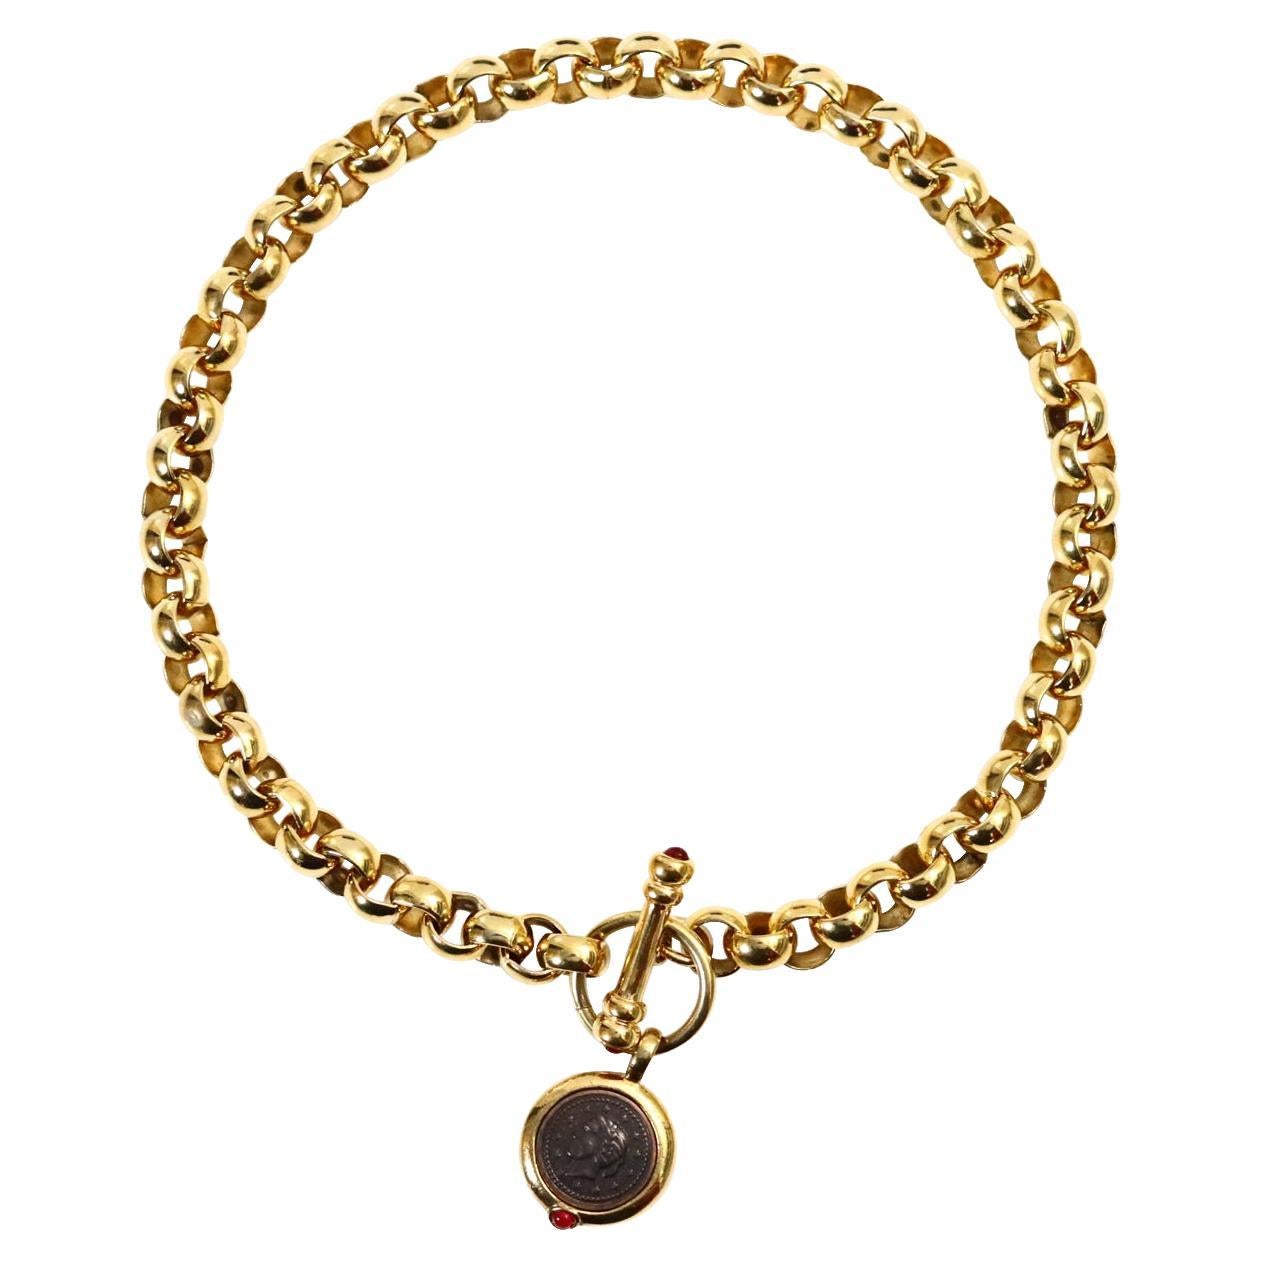 Vintage Gold Rollo Chain with Toggle and Dangling Coin Necklace Circa 1990s.  The toggle has red cabochons and the coin has black imprinted  dangling face. This is a classic necklace that is heavy and well made.  Each side of the toggle also has the